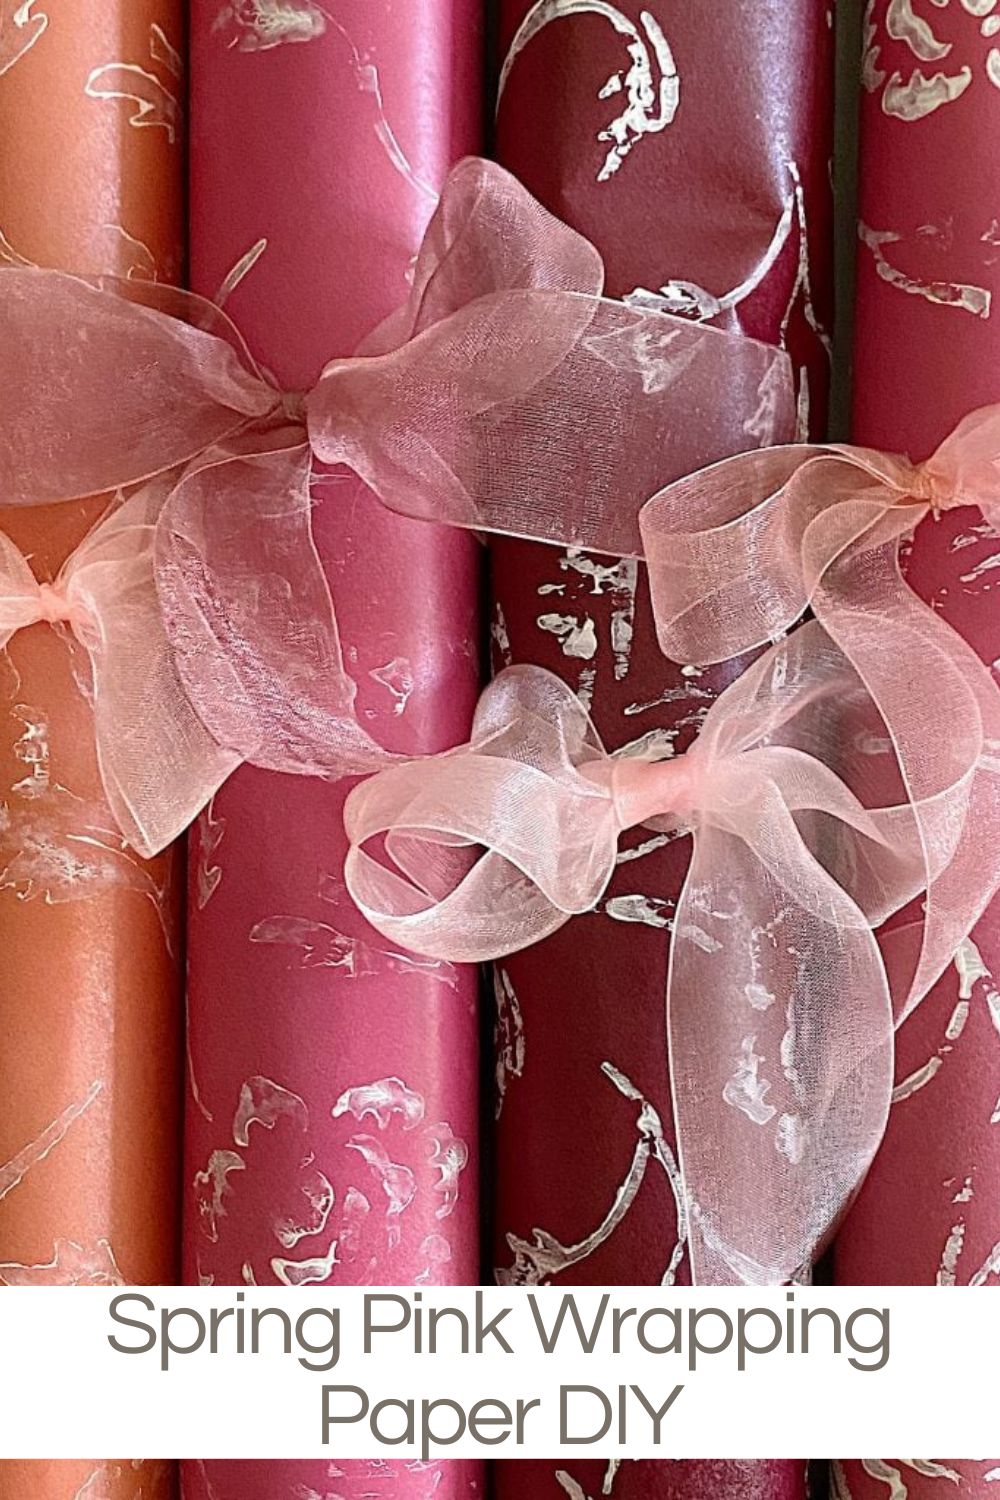 I decided to come up with a craft idea only using things I already own.  This homemade spring pink wrapping paper is one of my new favorite easy paper crafts.